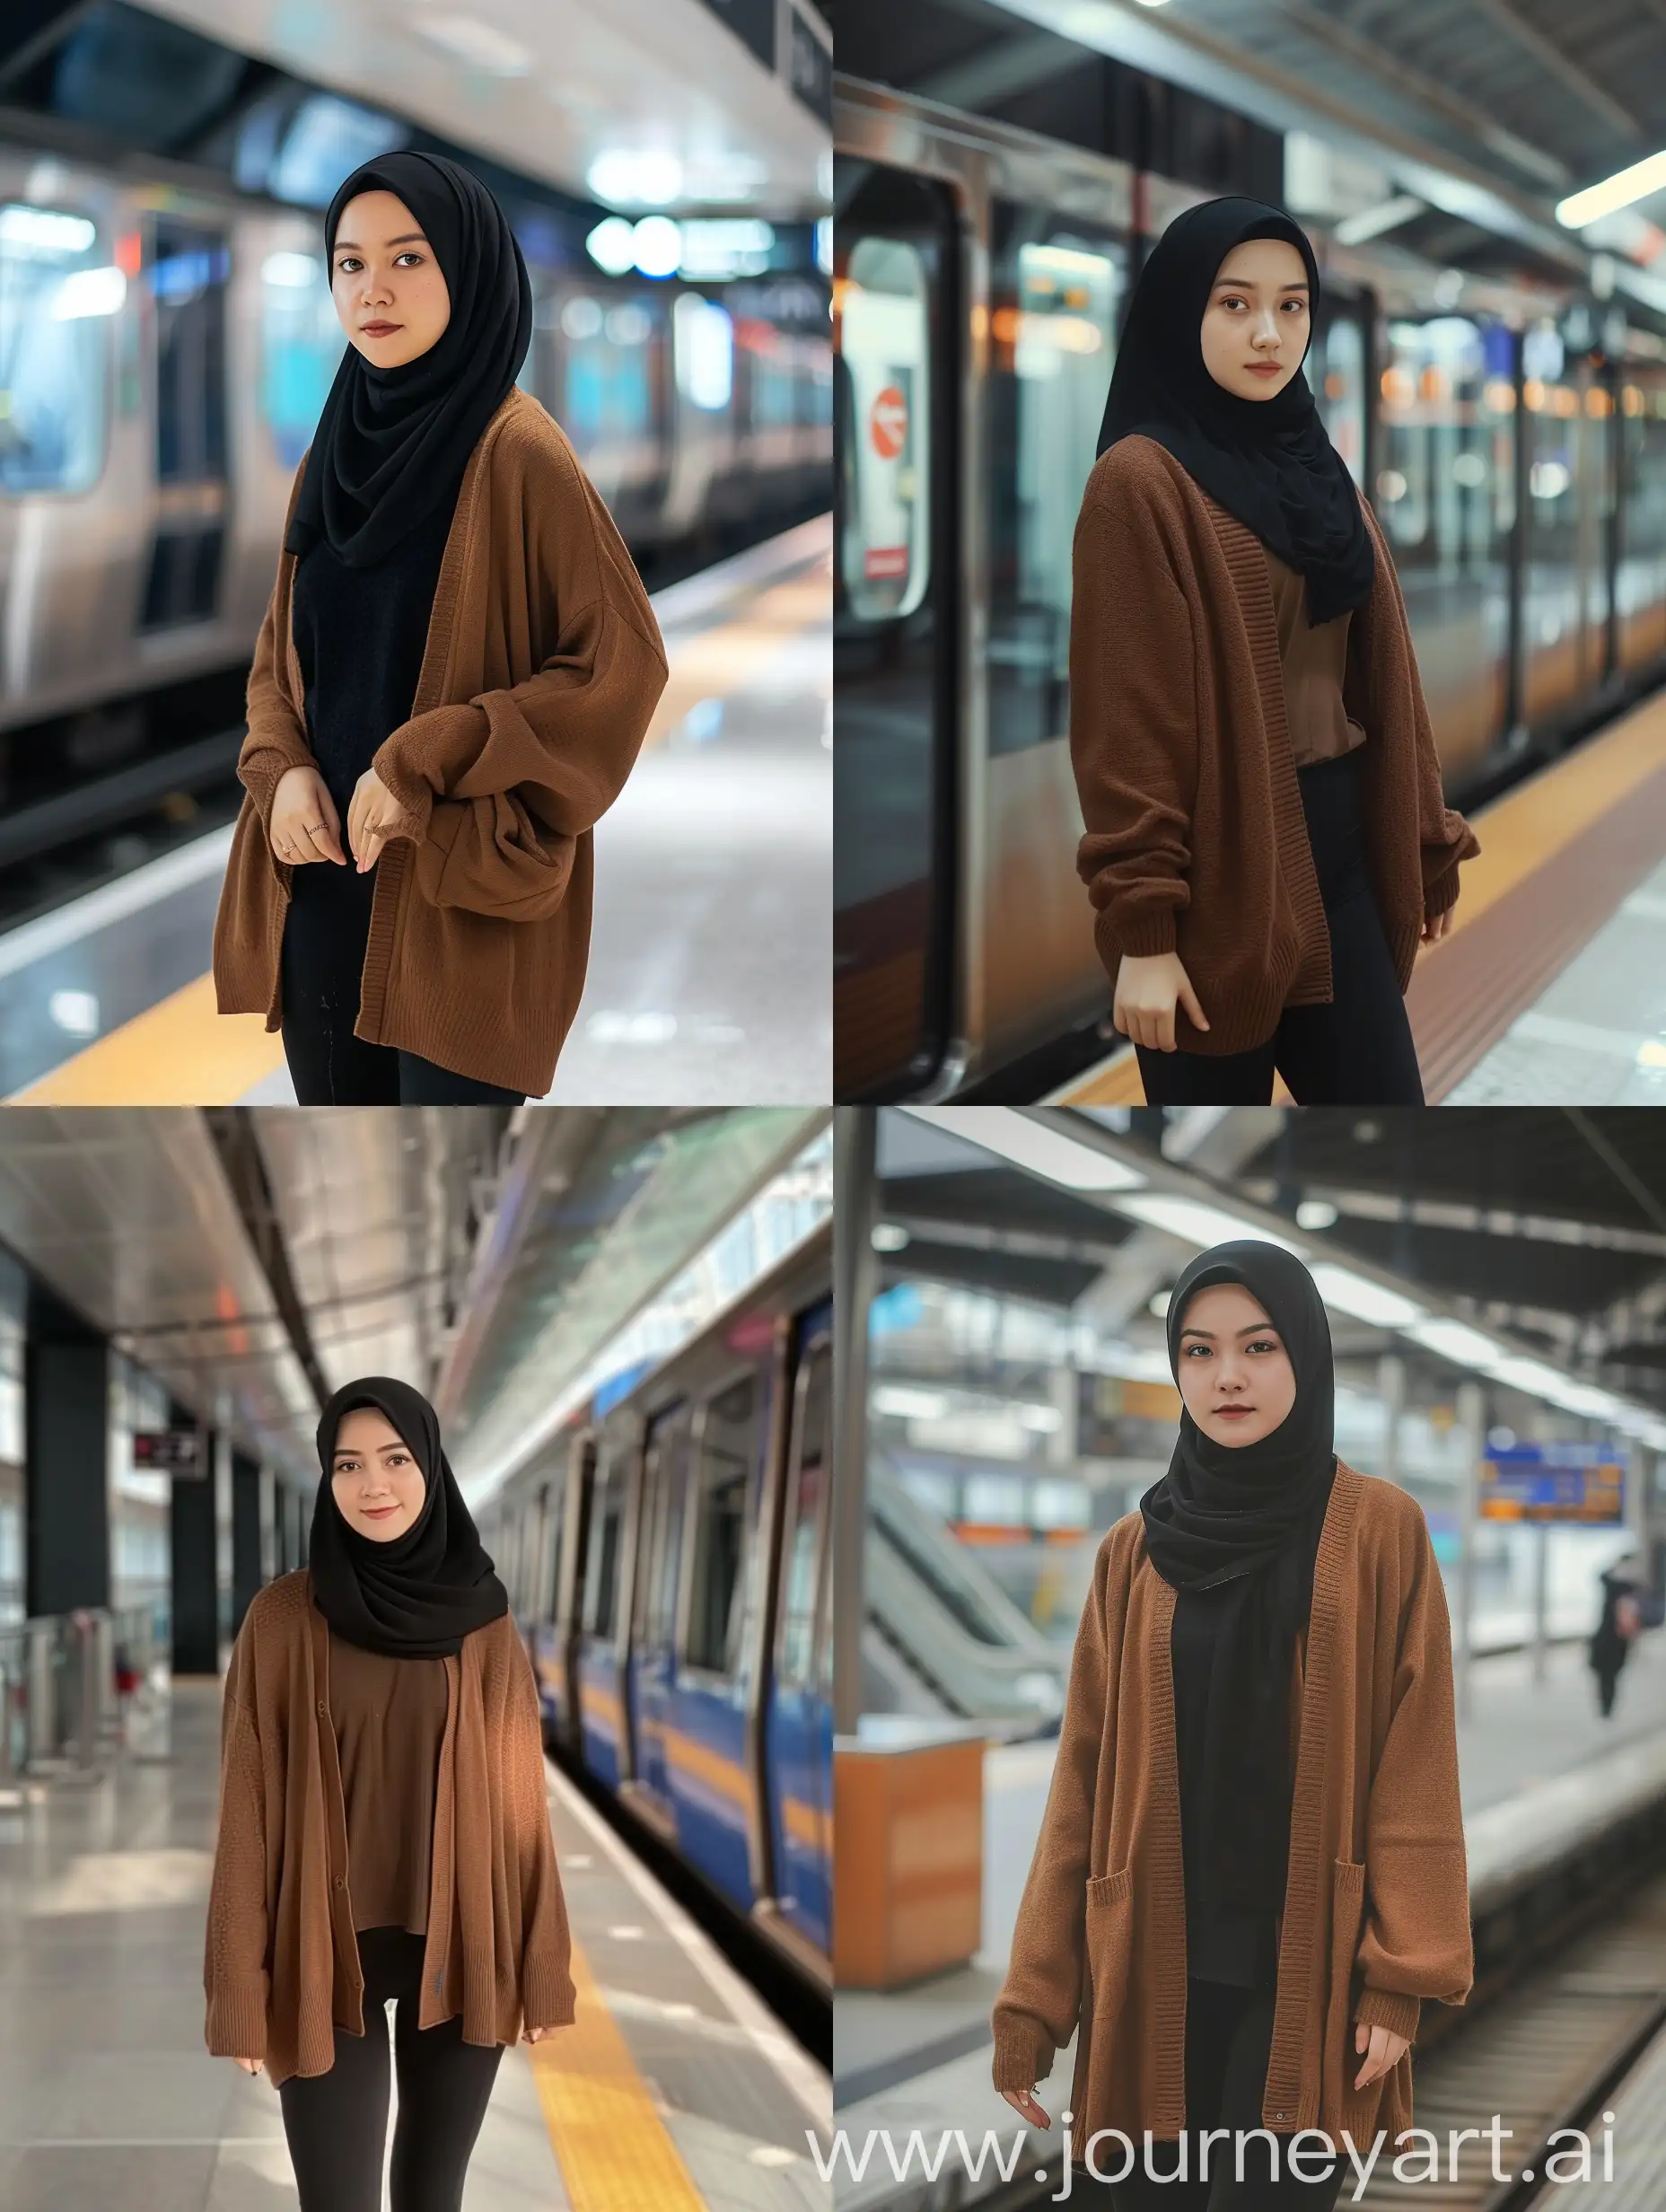 An indonesian woman wearing black hijab, wearing brown cardigan, and wearing black legging pants. Standing in a train station